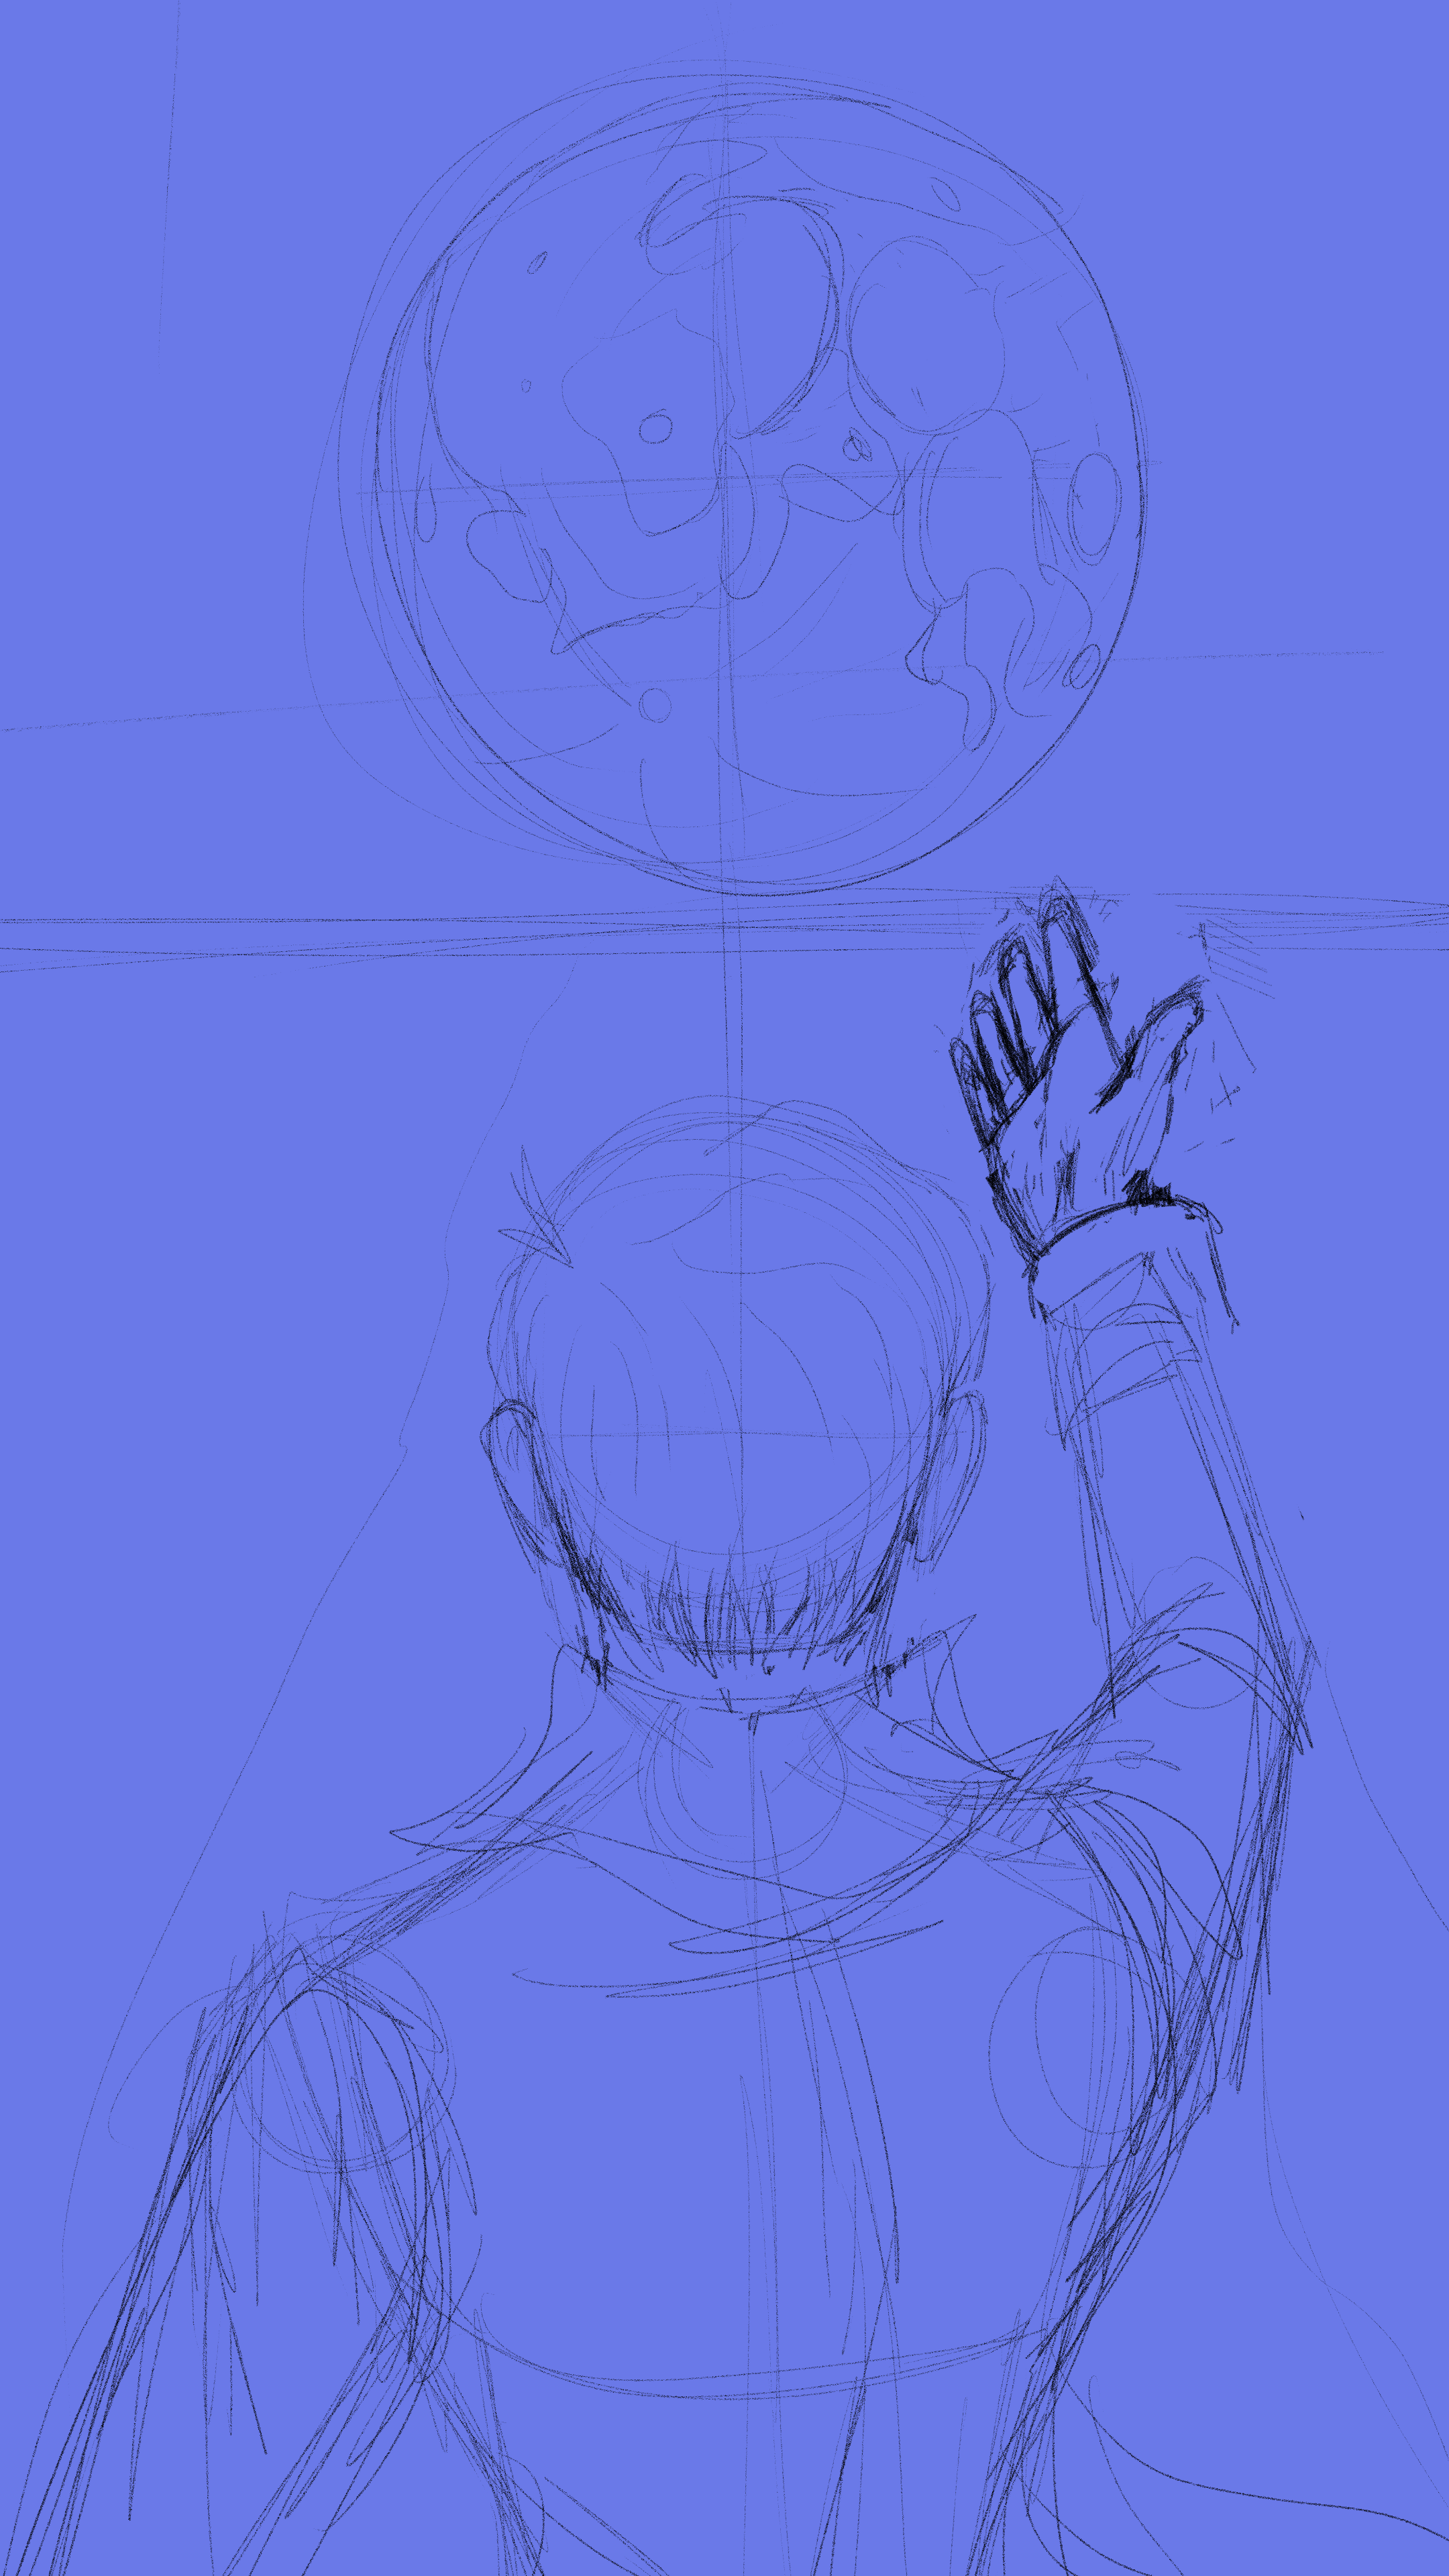 light blue backed sketch of an individual reaching up towards the moon